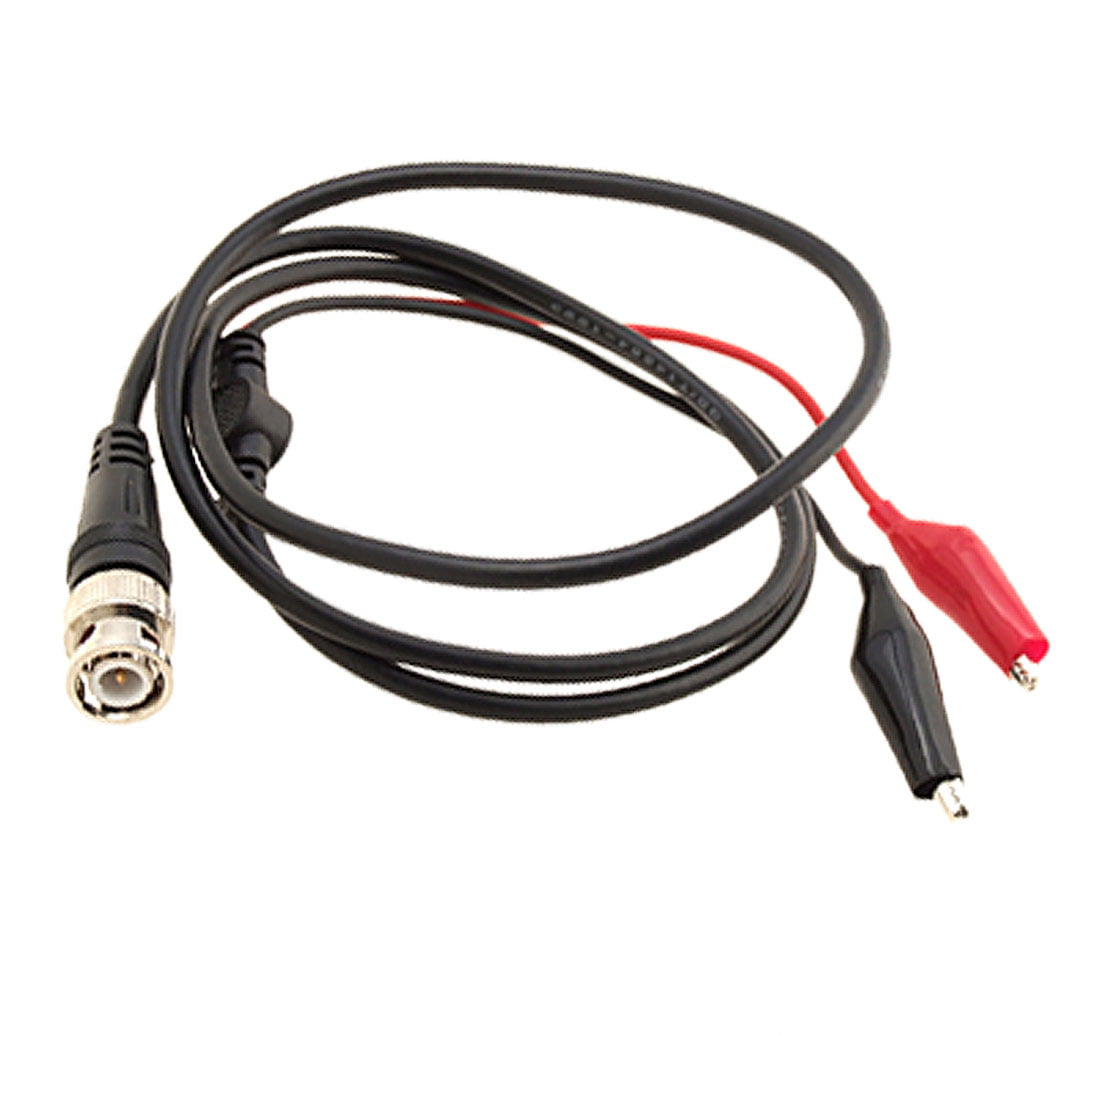 BNC Male plug to Alligator Clips Test Cable Lead,Coxial Lead insulated 